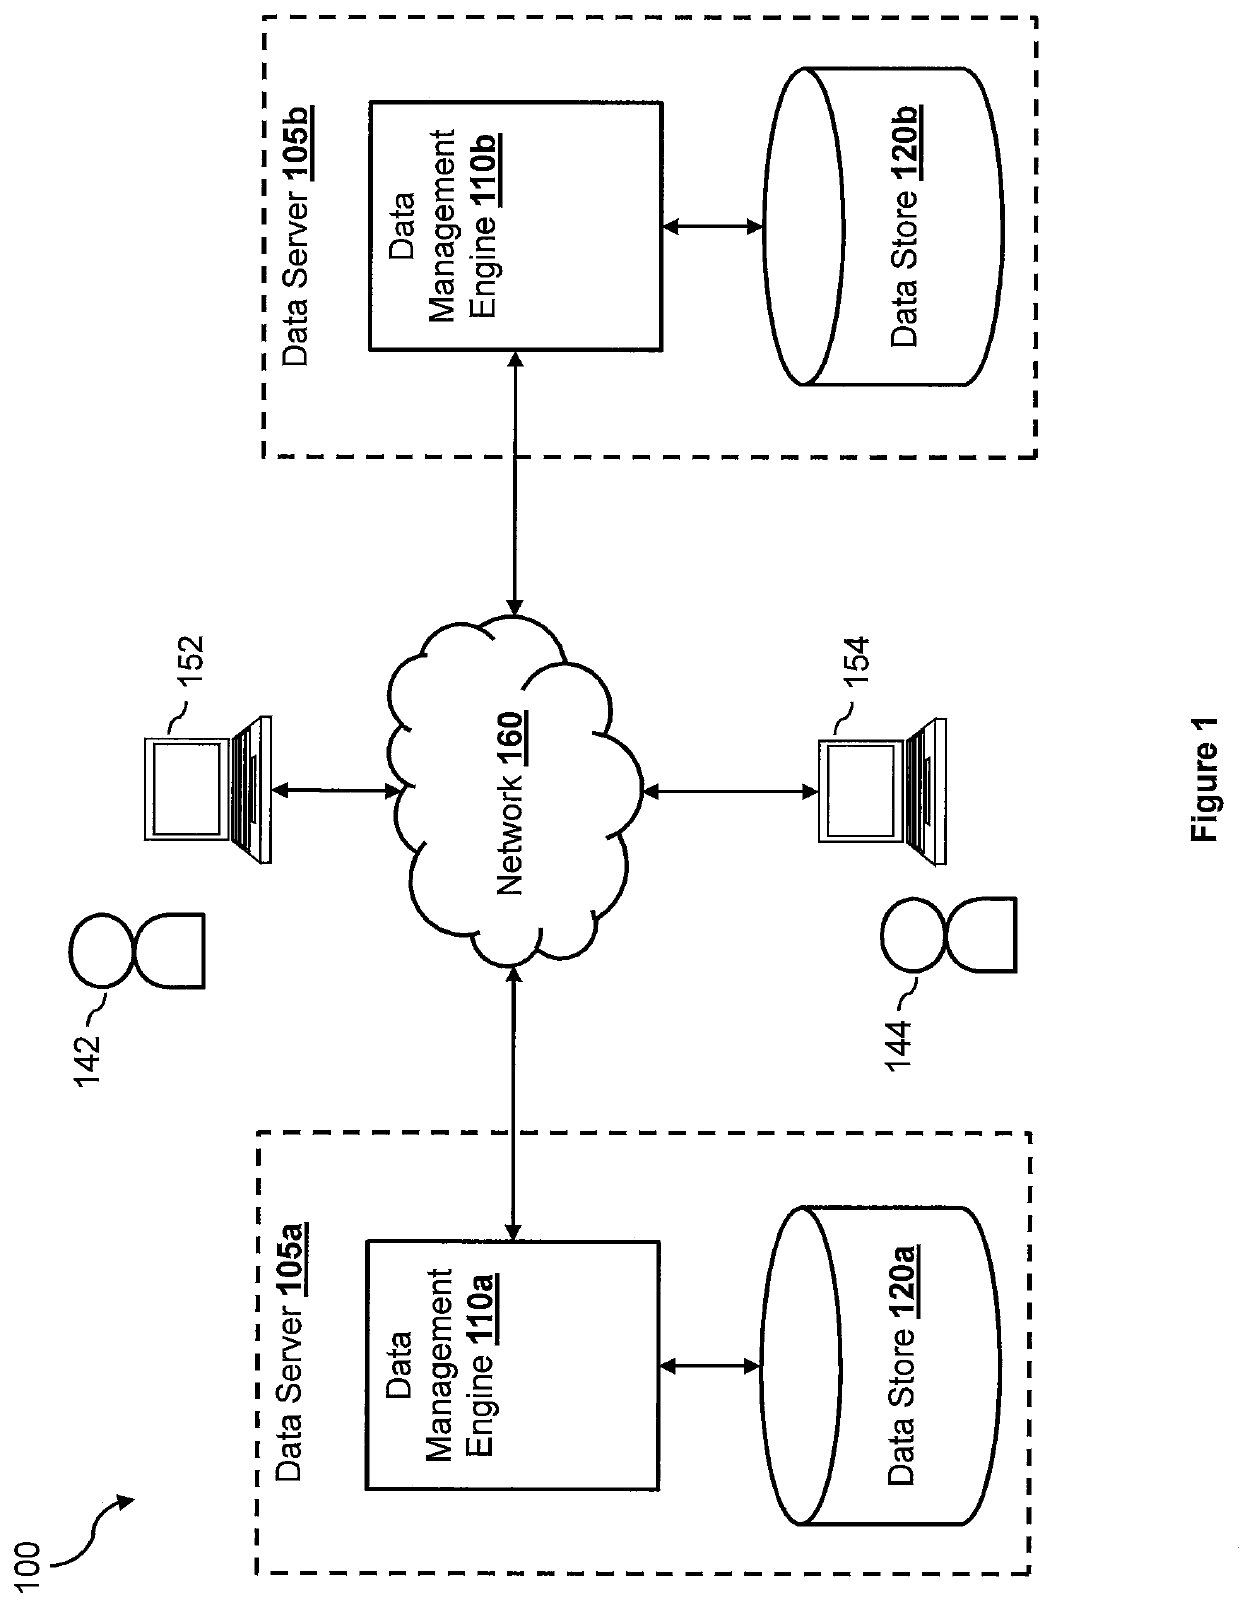 Reconciliation of data in a distributed system